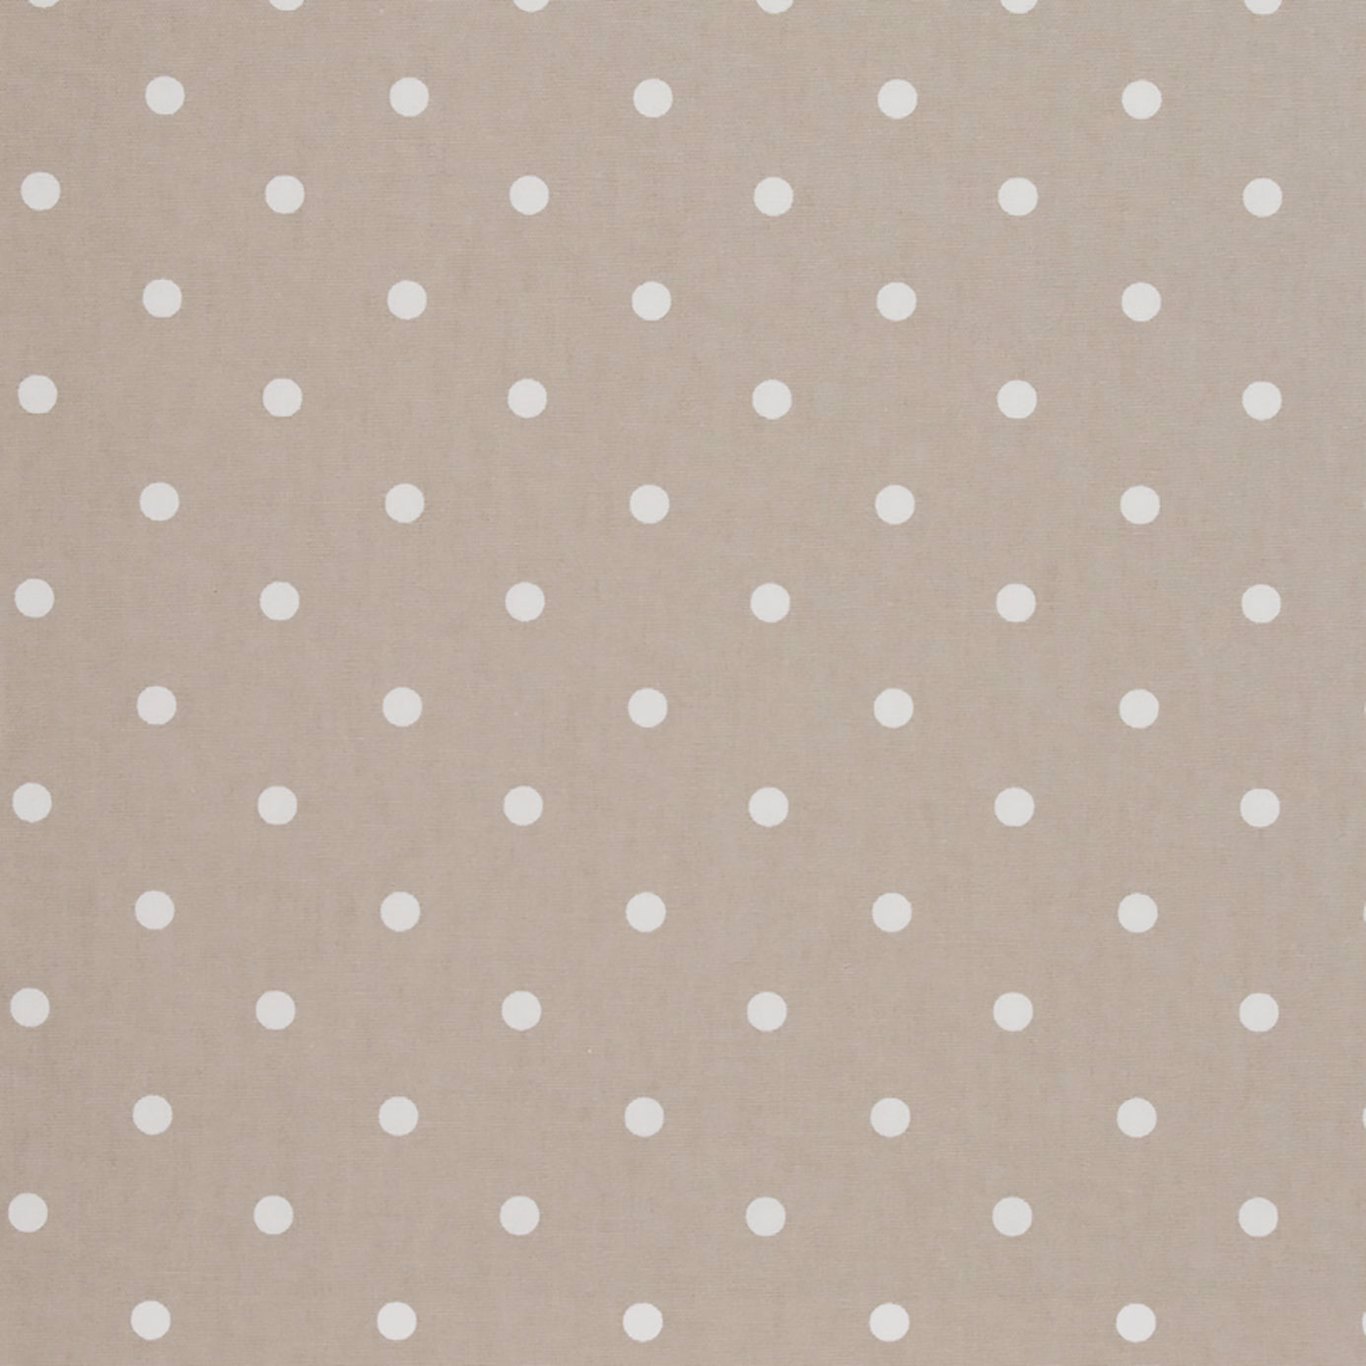 Dotty Taupe Fabric by STG